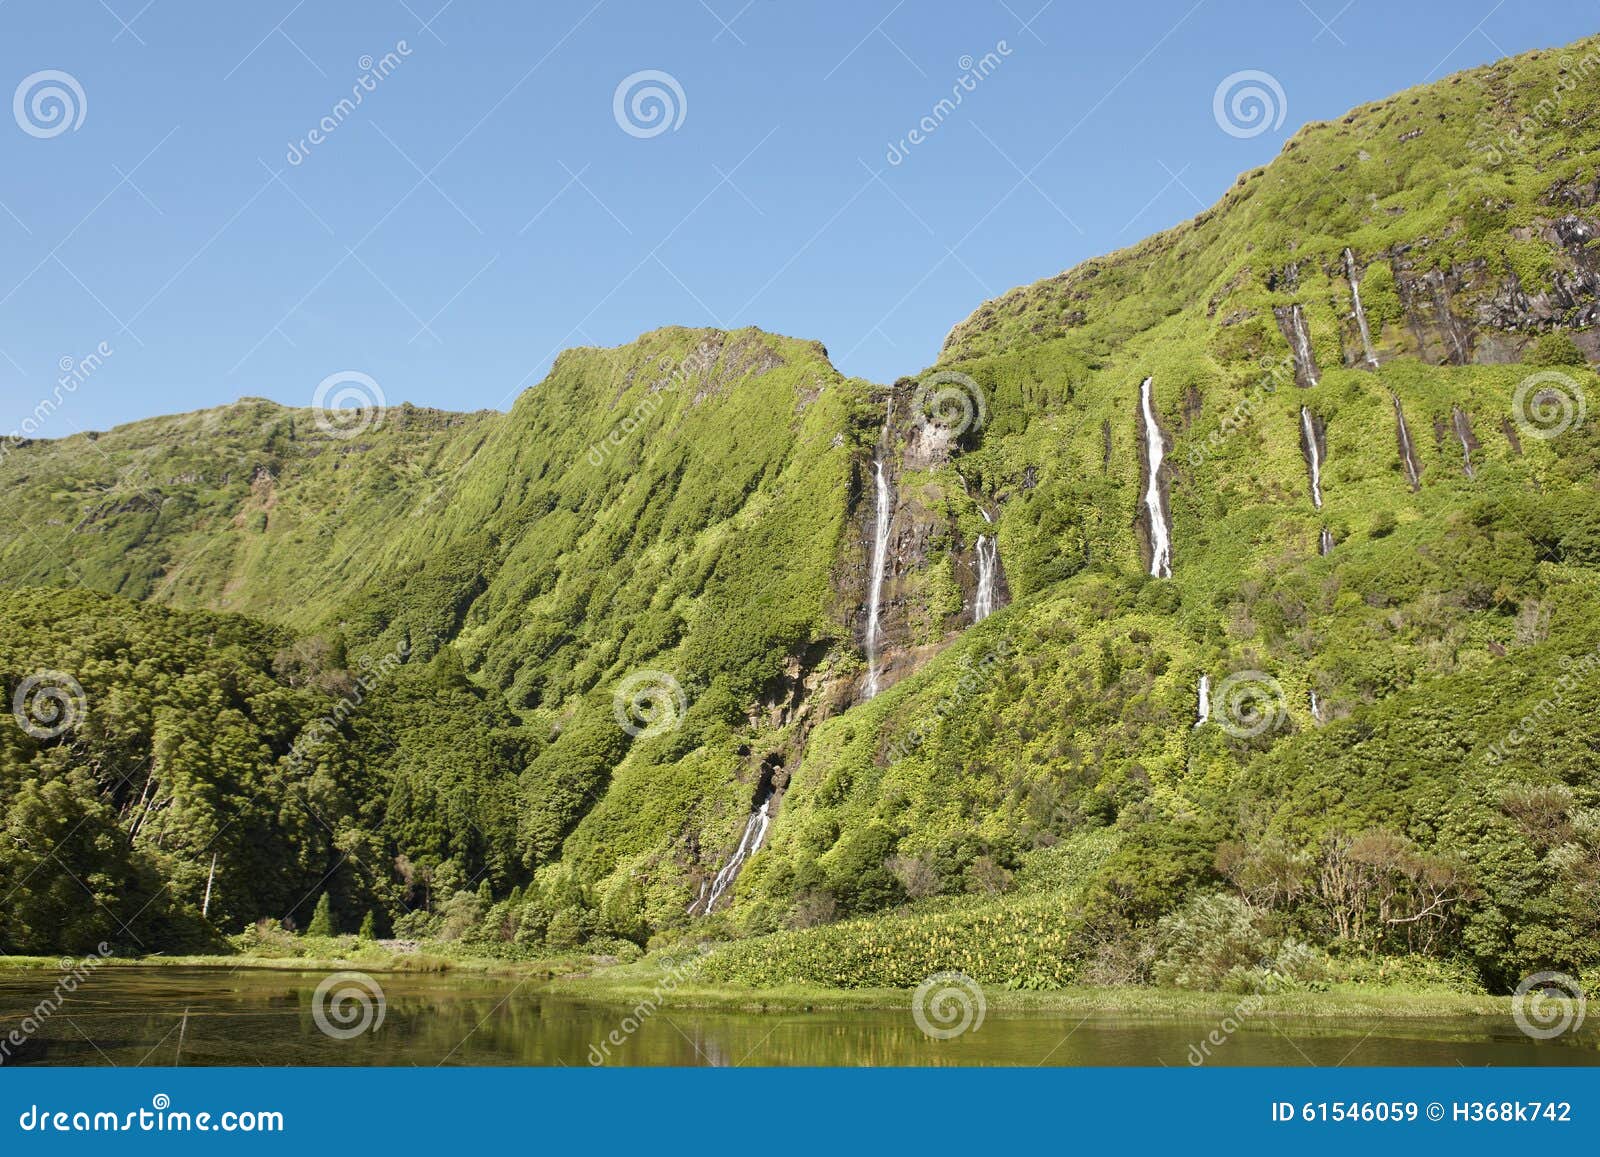 azores landscape in flores island. waterfalls in pozo da alagoinha